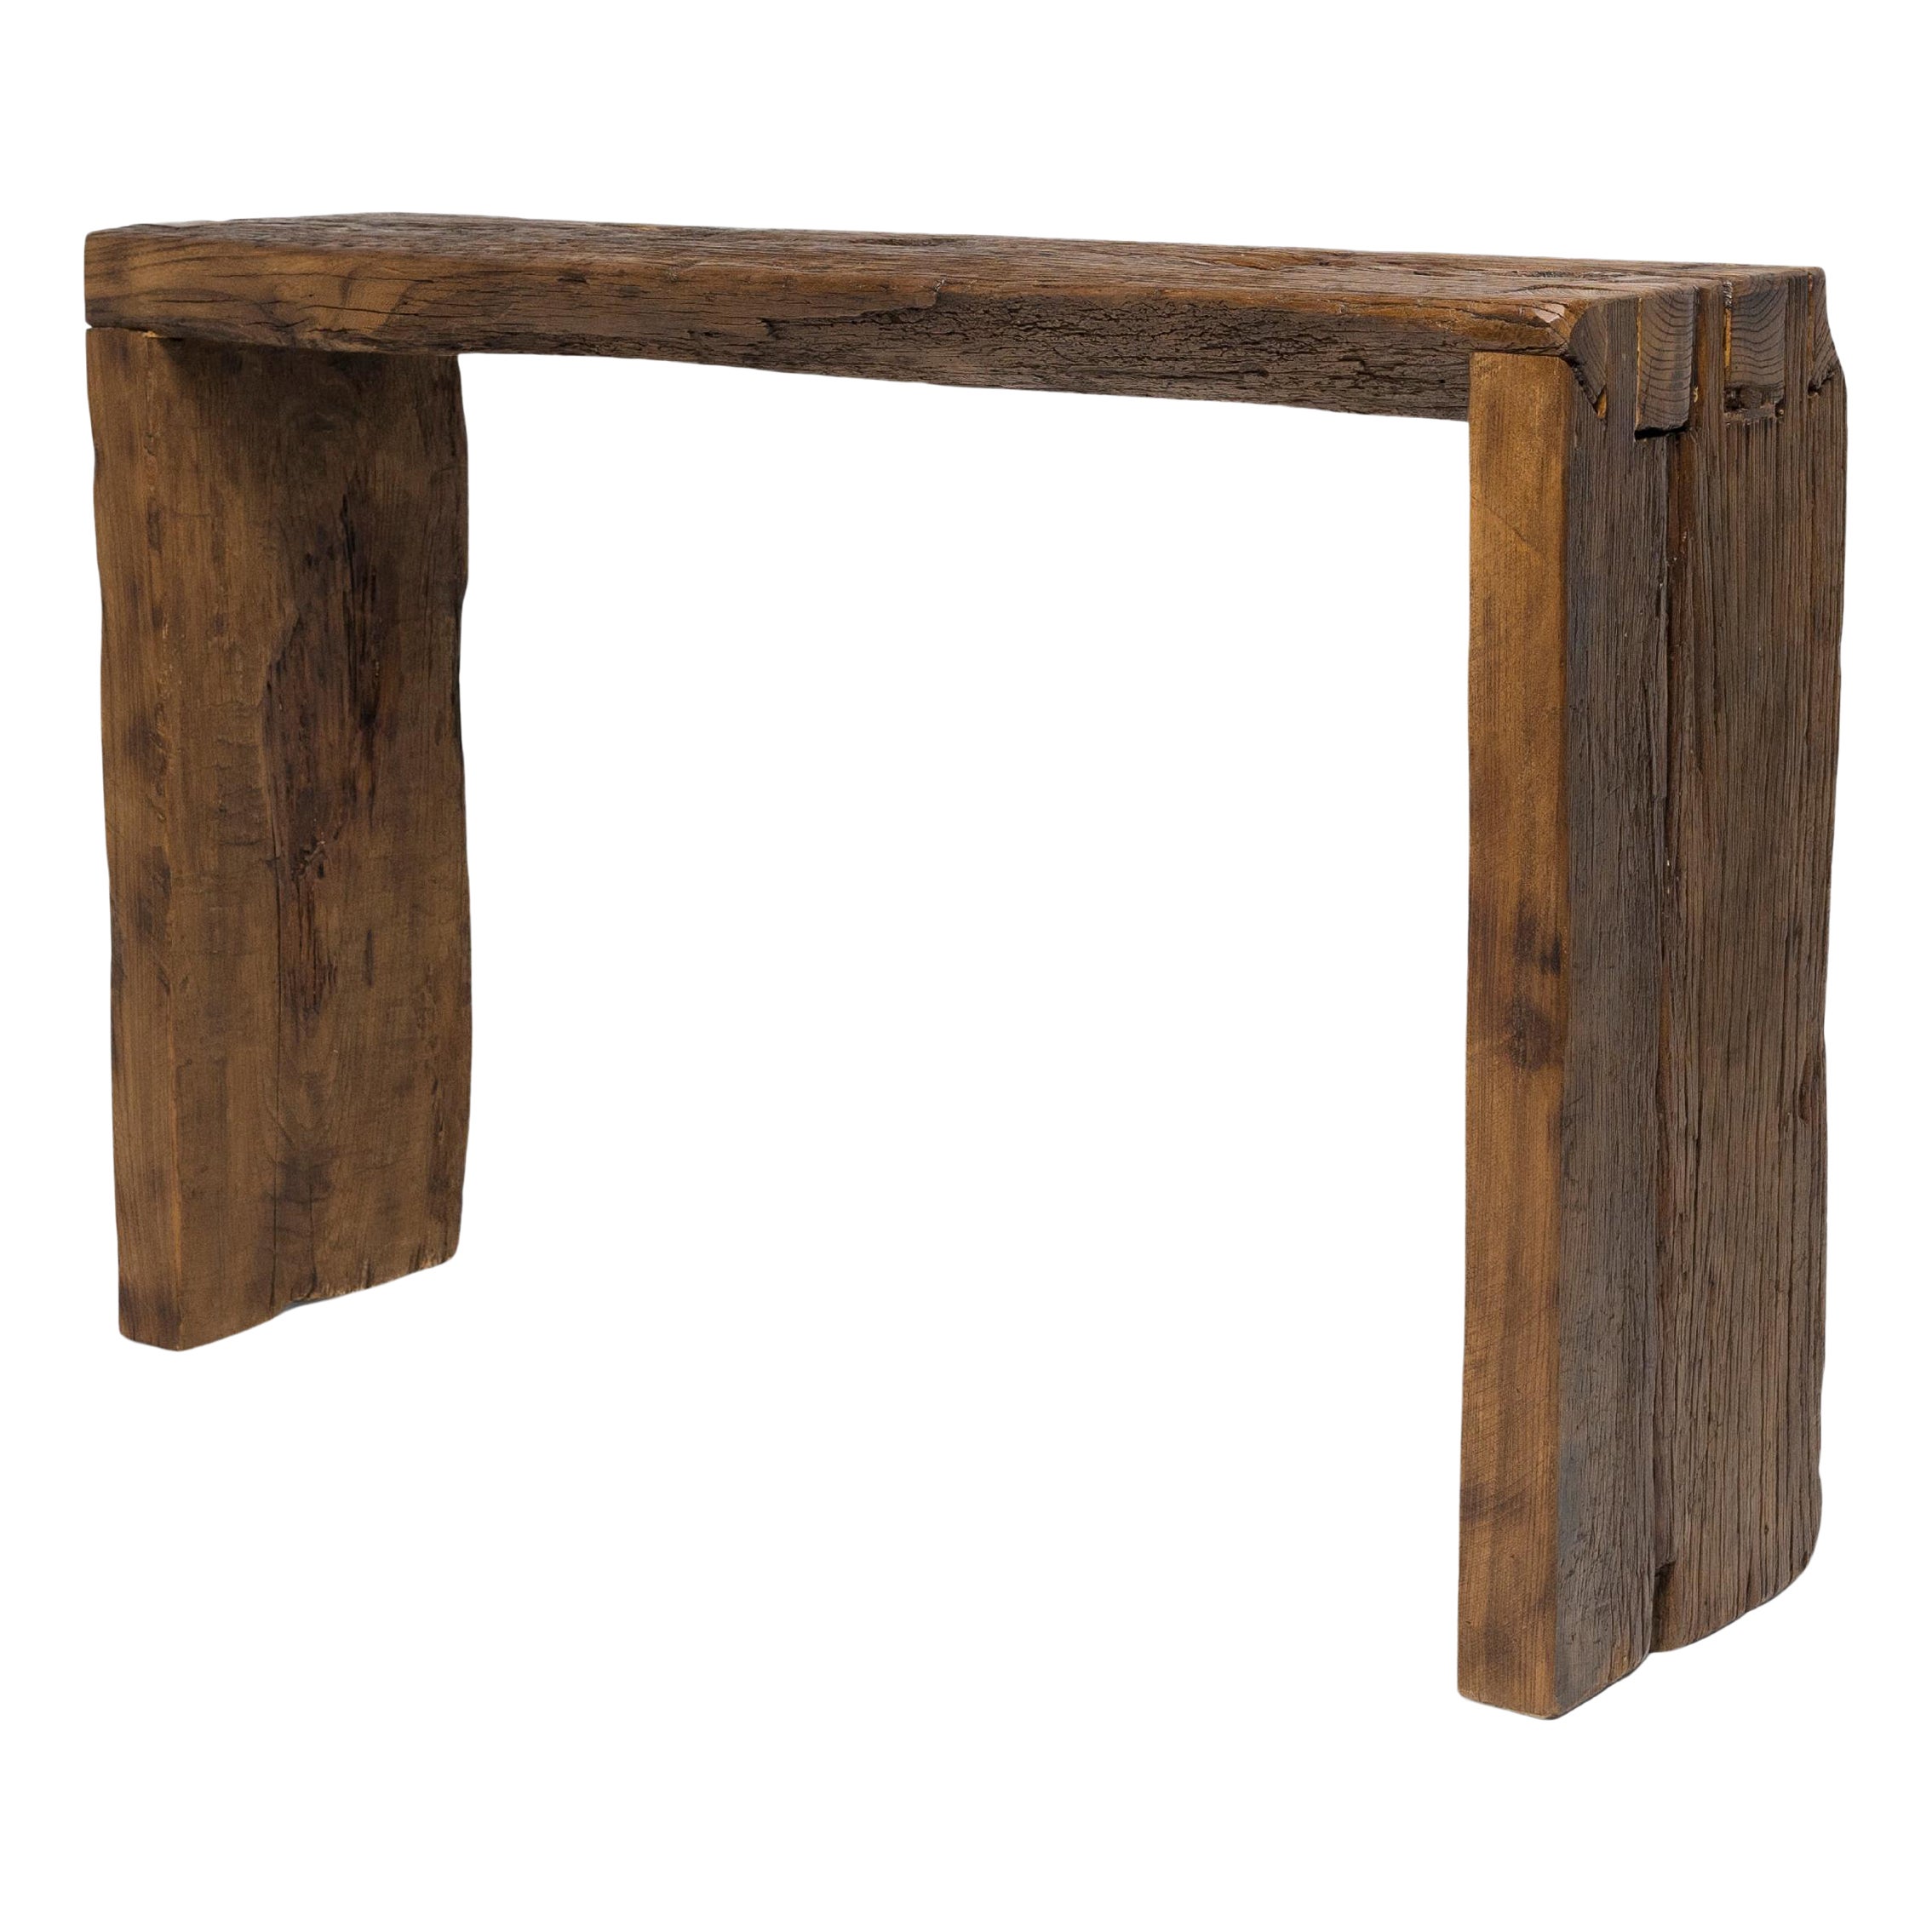 Chinese Reclaimed Elm Waterfall Table